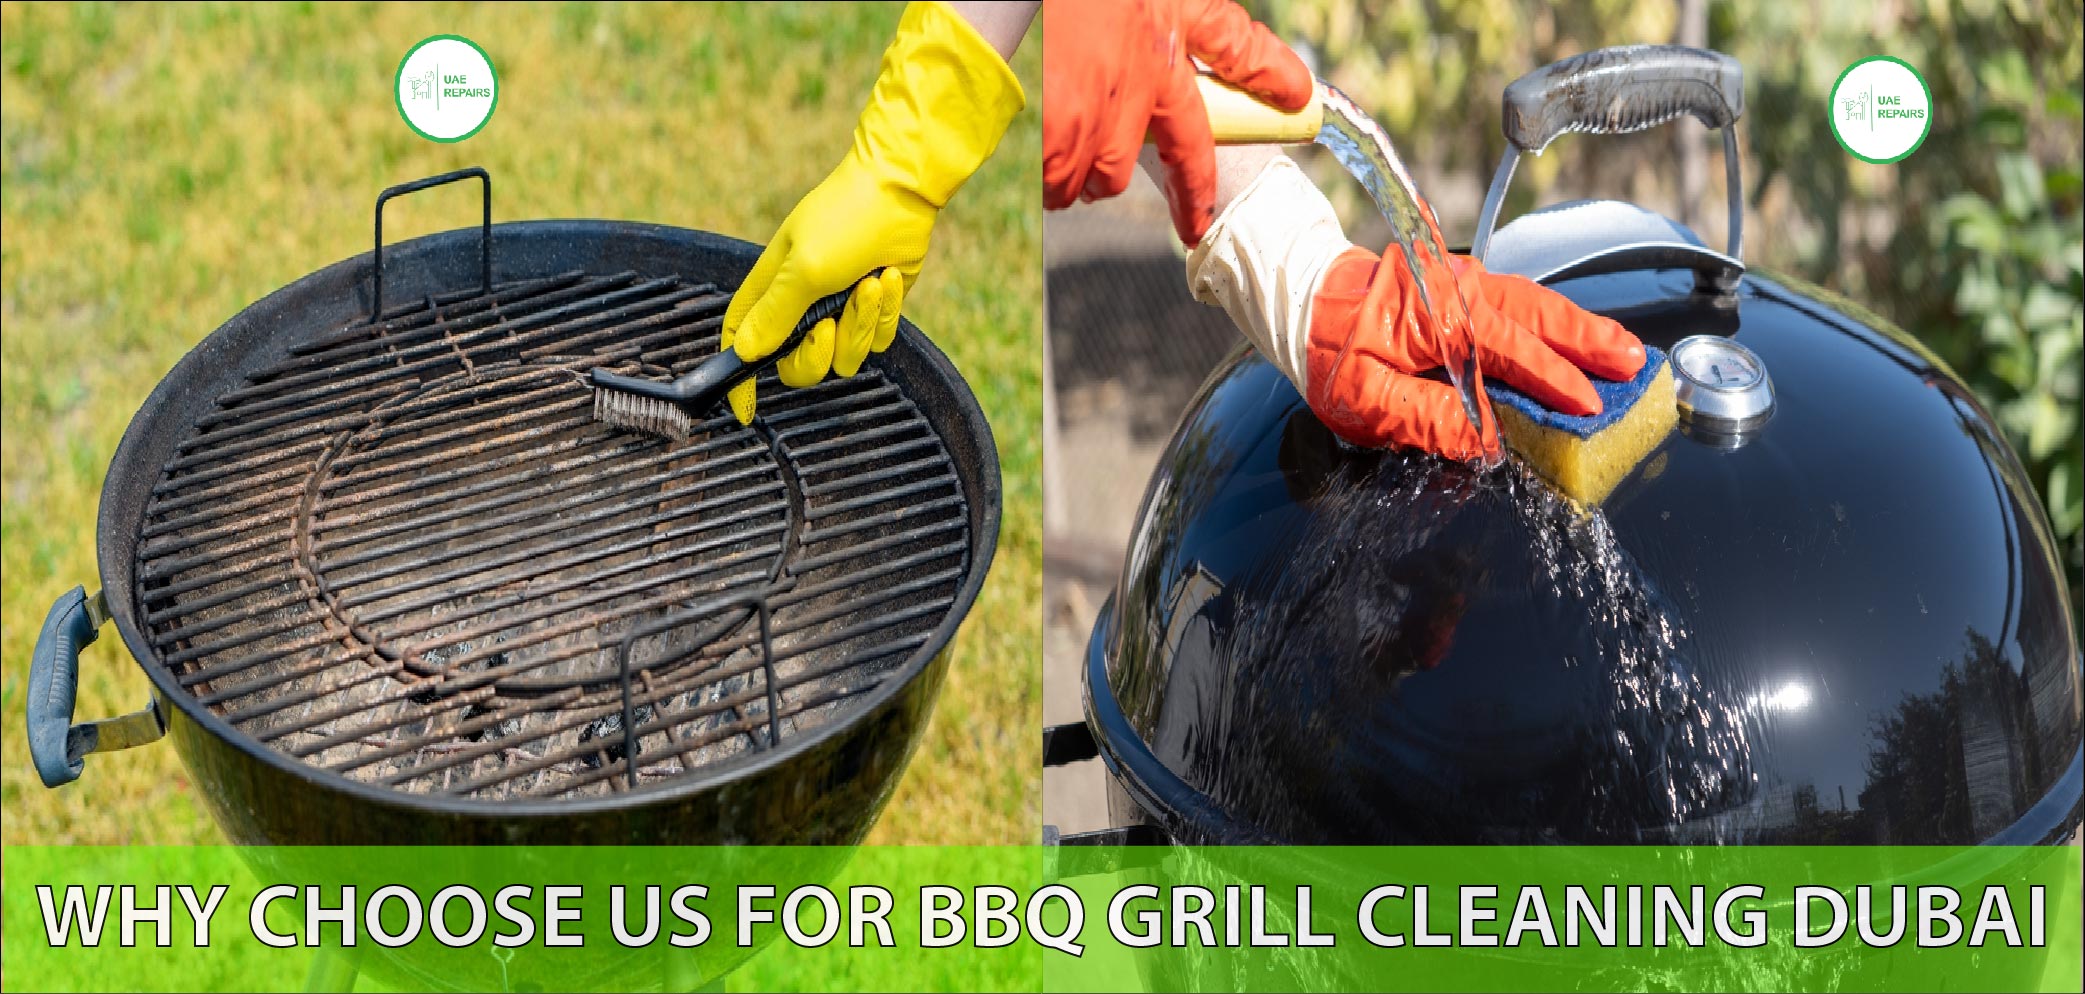 UAE REPAIRS WHY CHOOSE US FOR BARBECUE GRILL CLEANING DUBAI